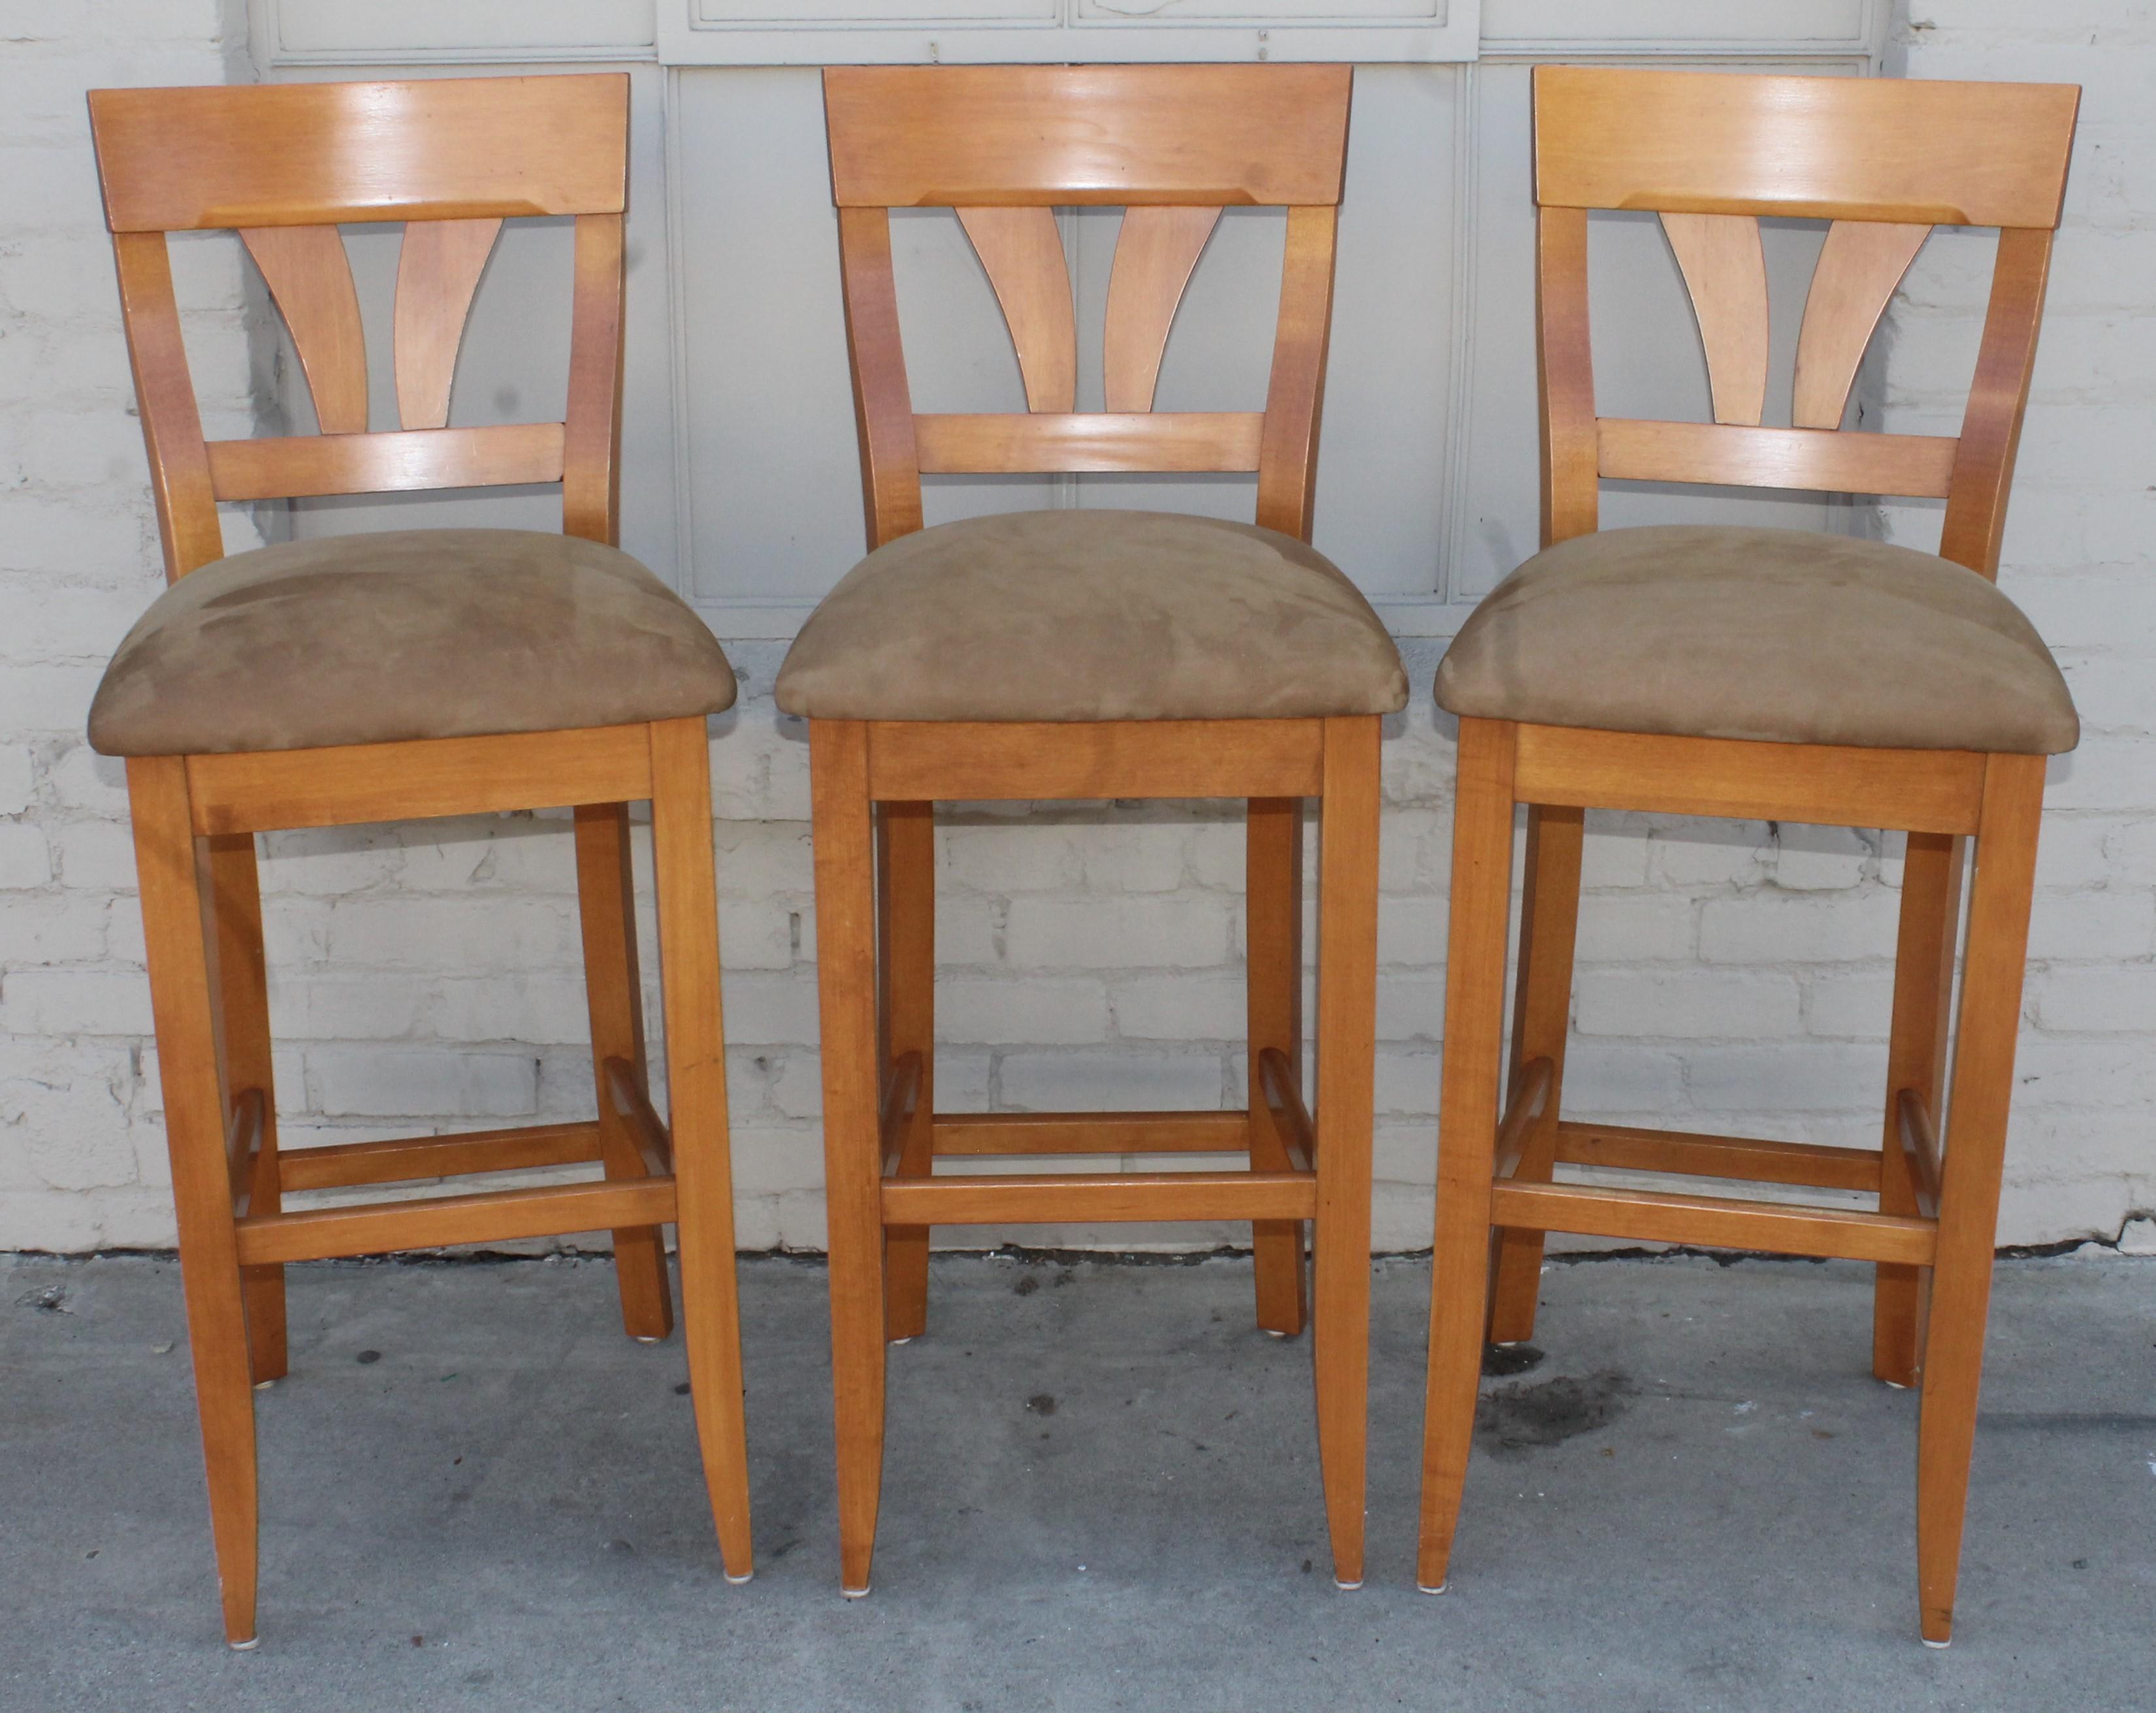 These high back maple bar stools are newly upholstered in high grade quality Italian suede. They are very sturdy and comfortable. The condition is perfect.